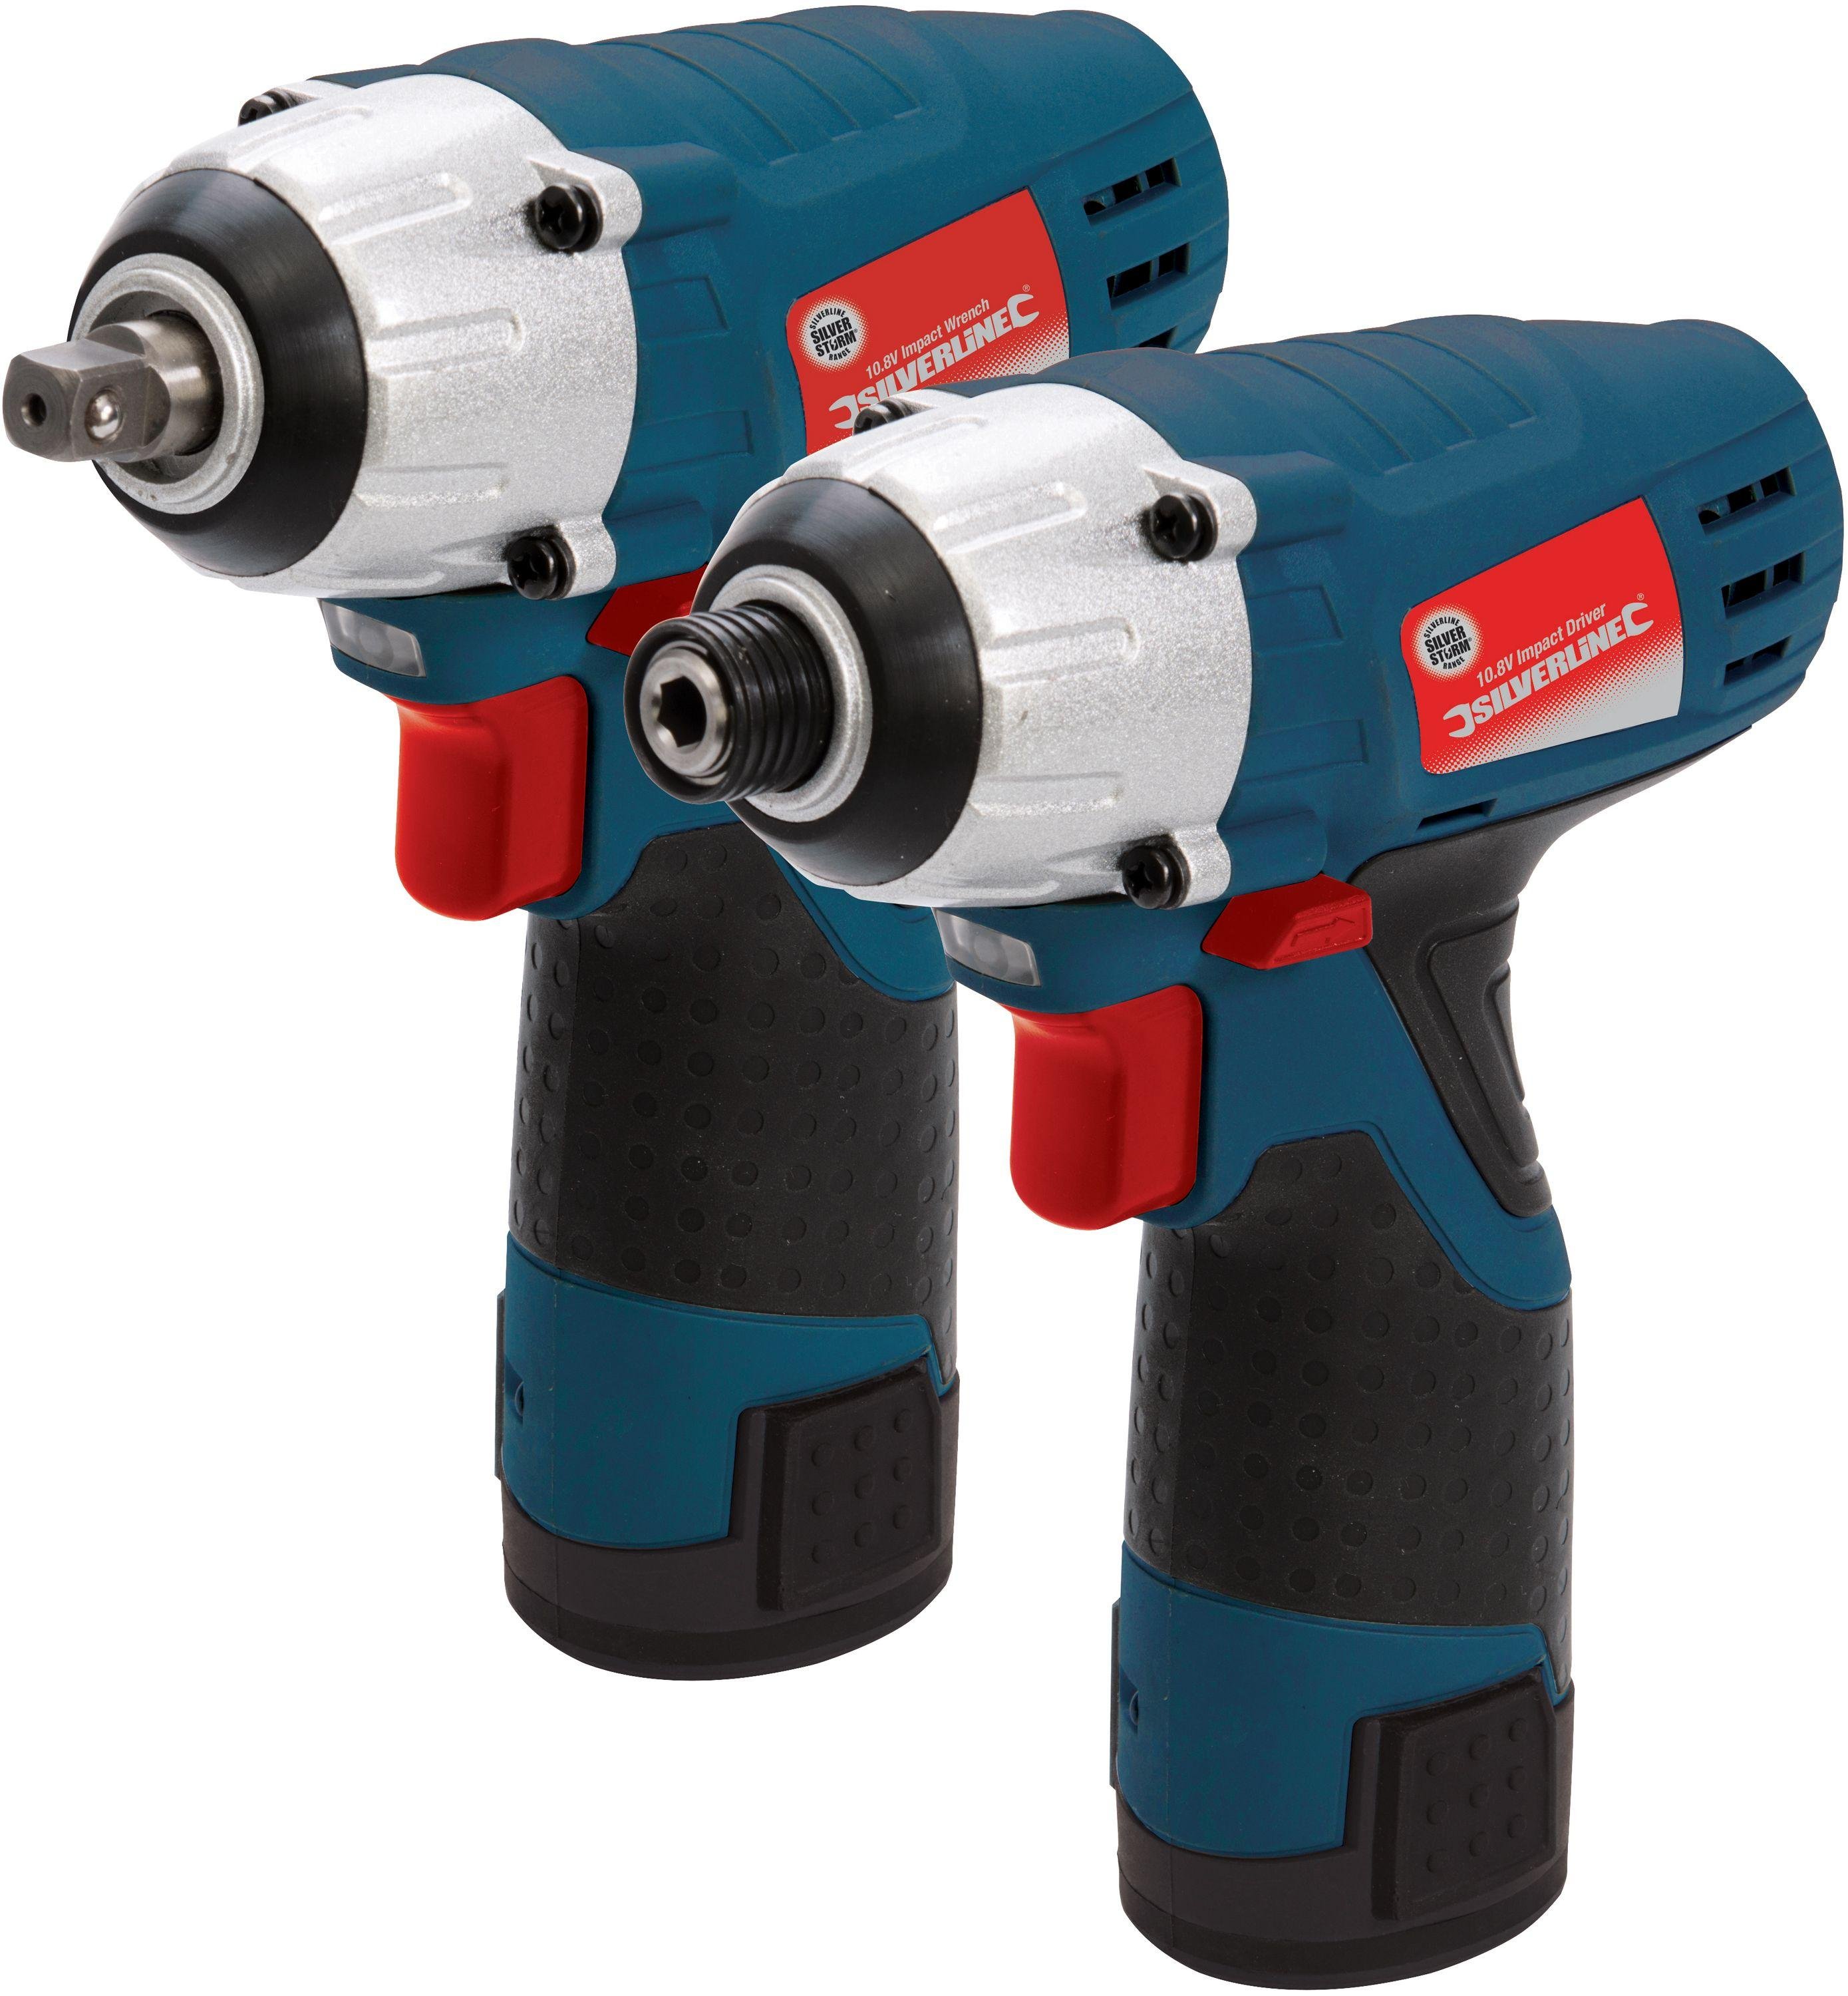 Silverstorm Cordless Impact Wrench and Driver Set - 10.8V